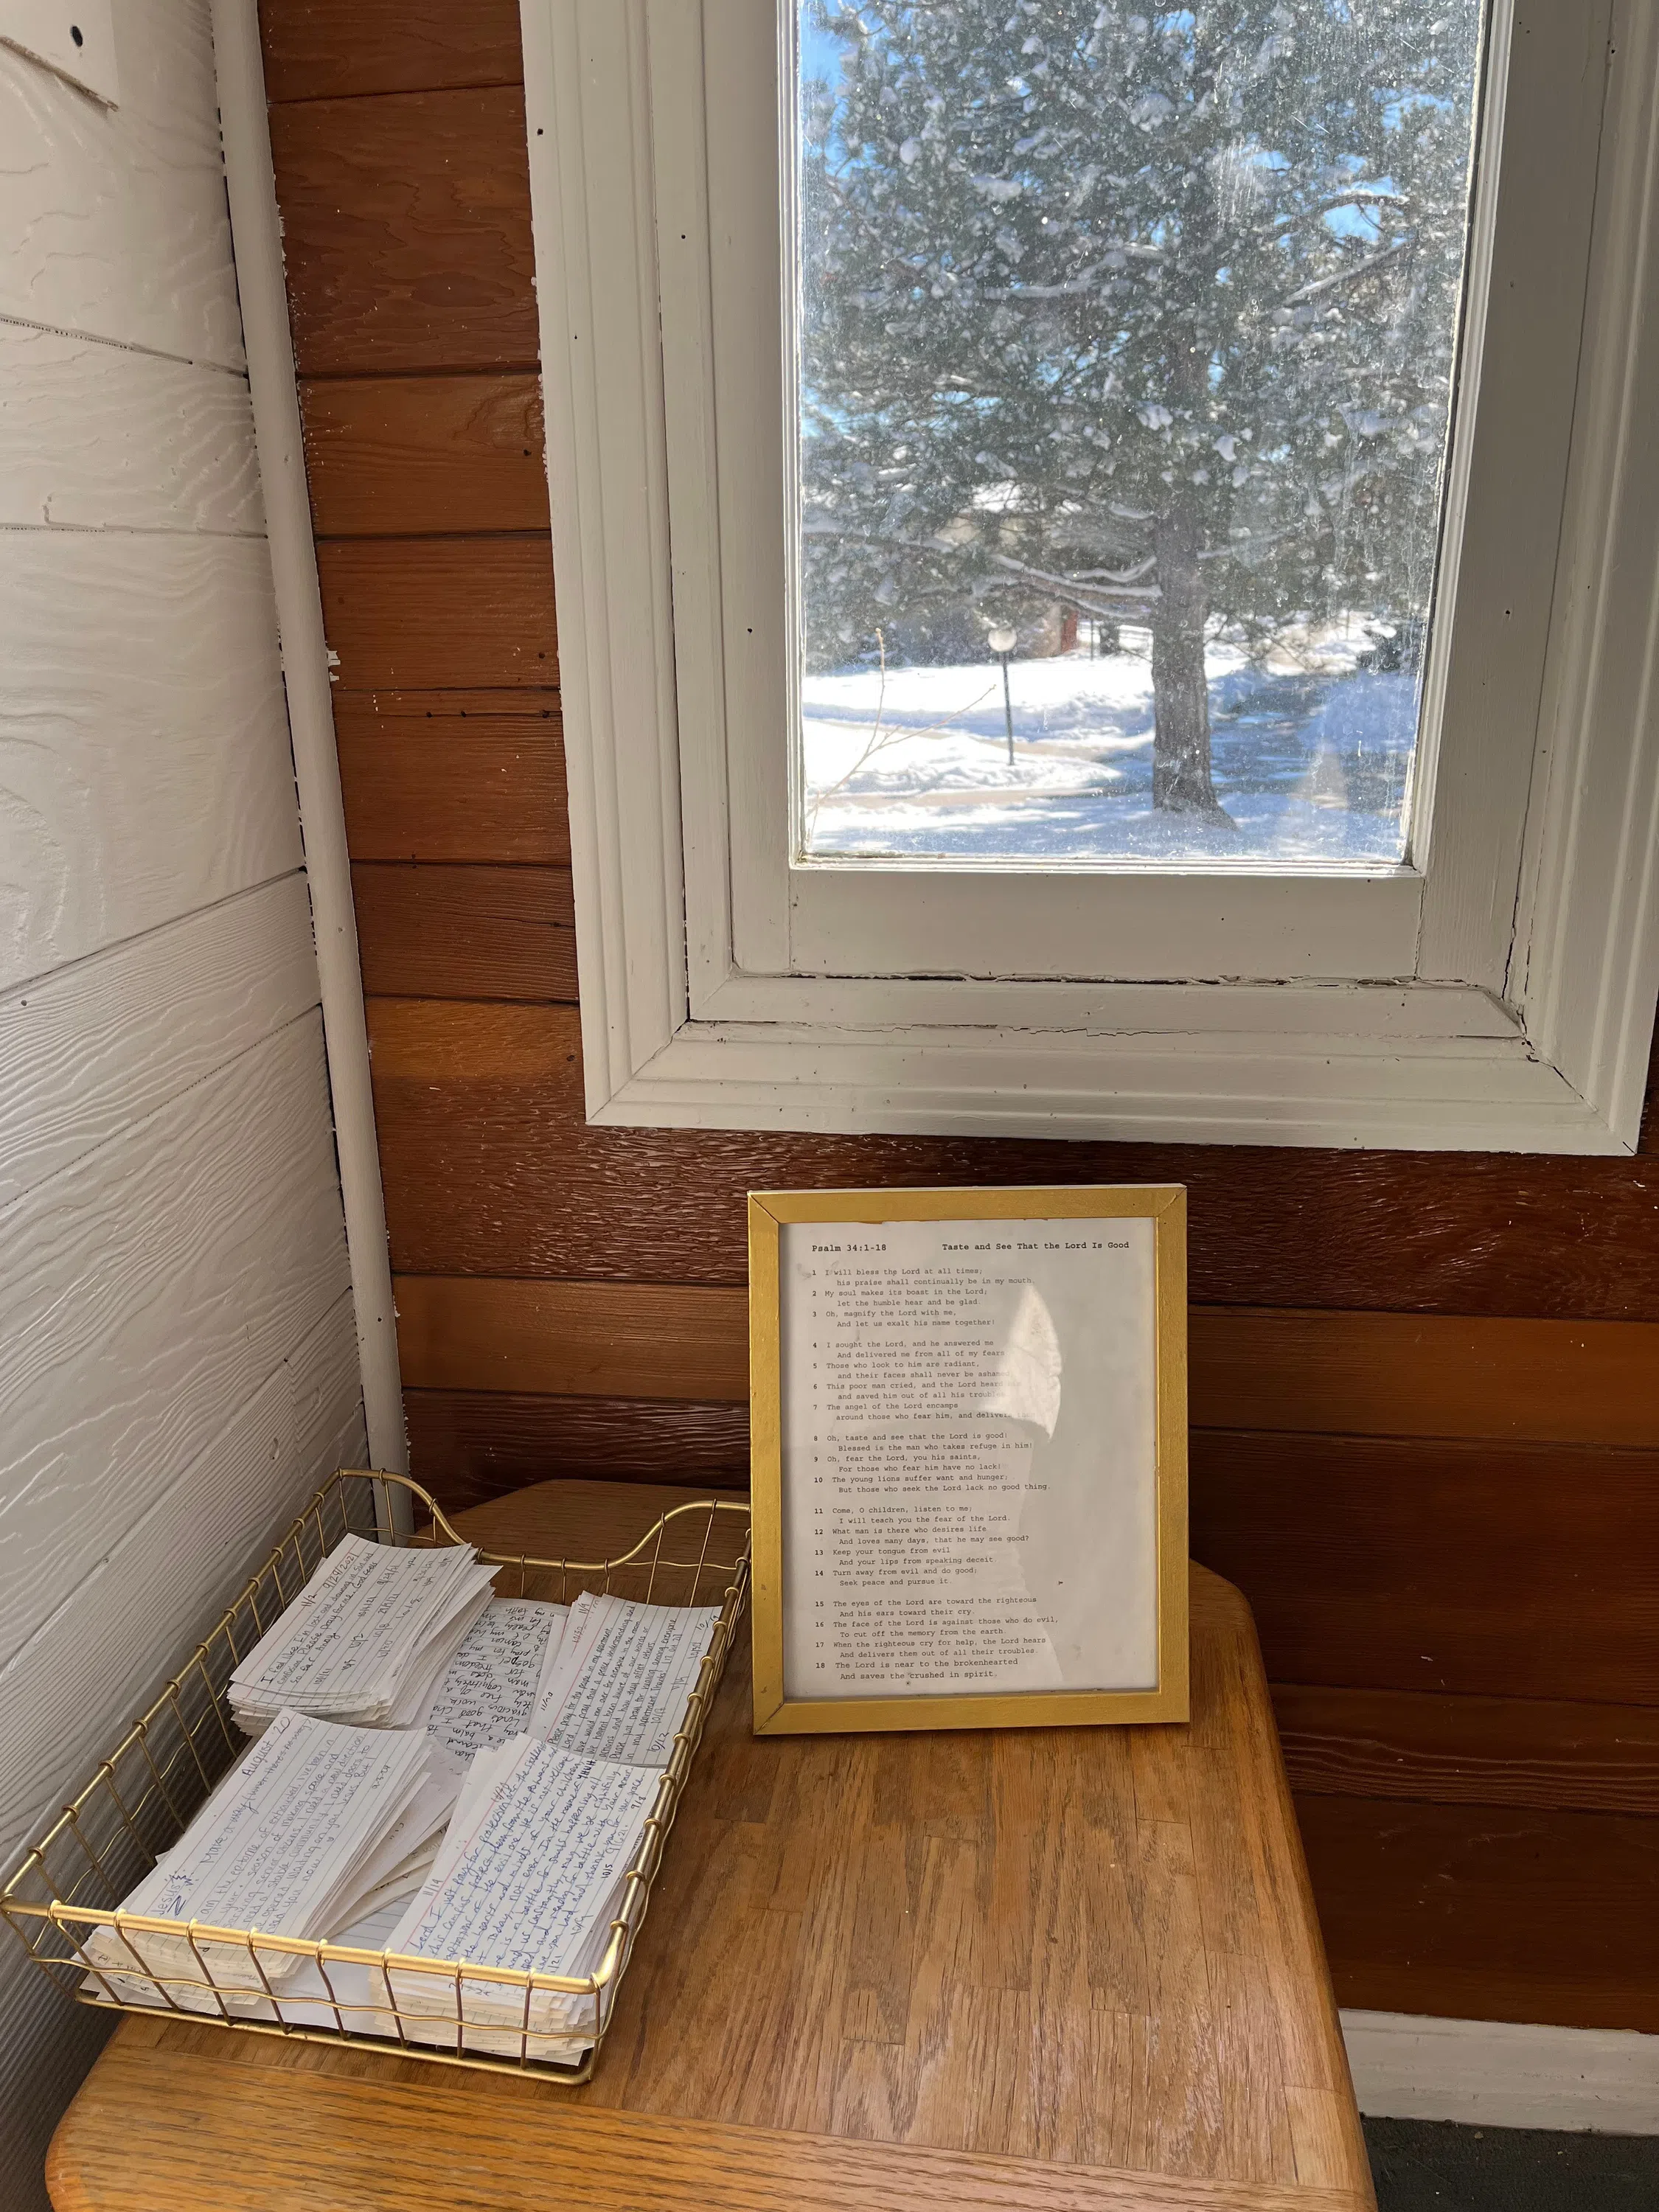 Notecards in a wire basket with a verse printed in a frame